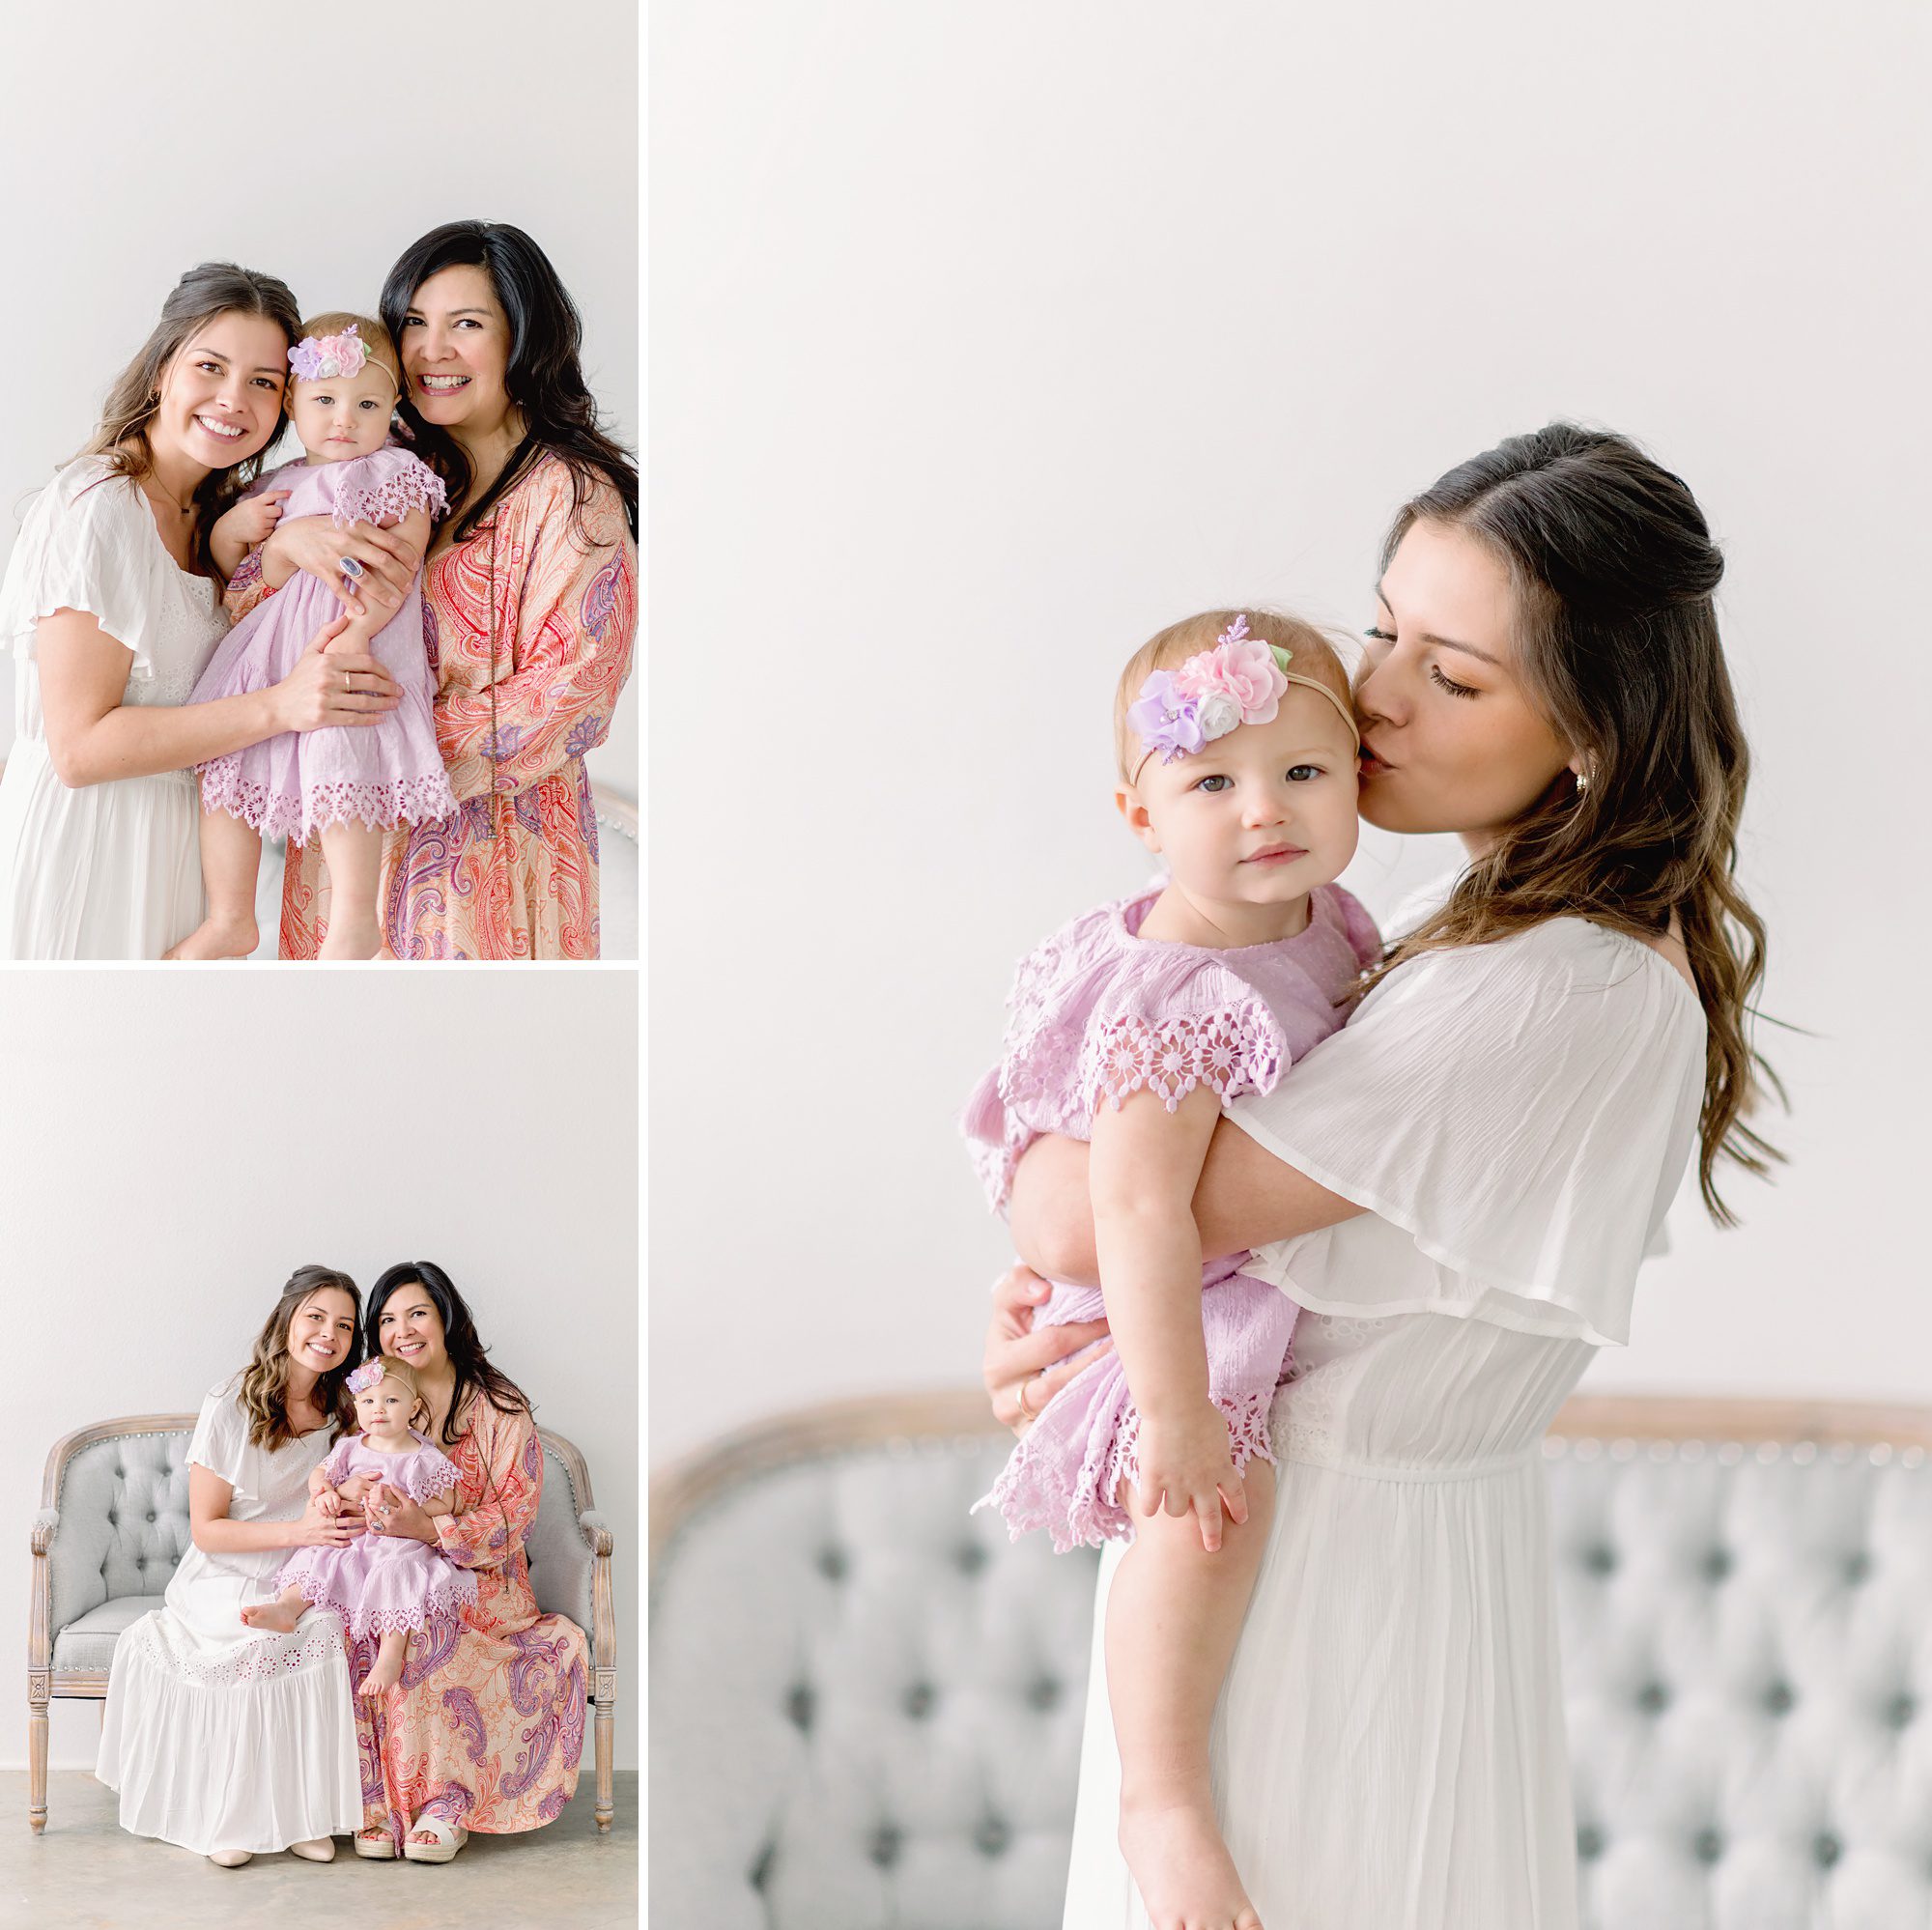 A summary of 2021's Mother's Day Mini Session Event in Studio in Centennial, Colorado.